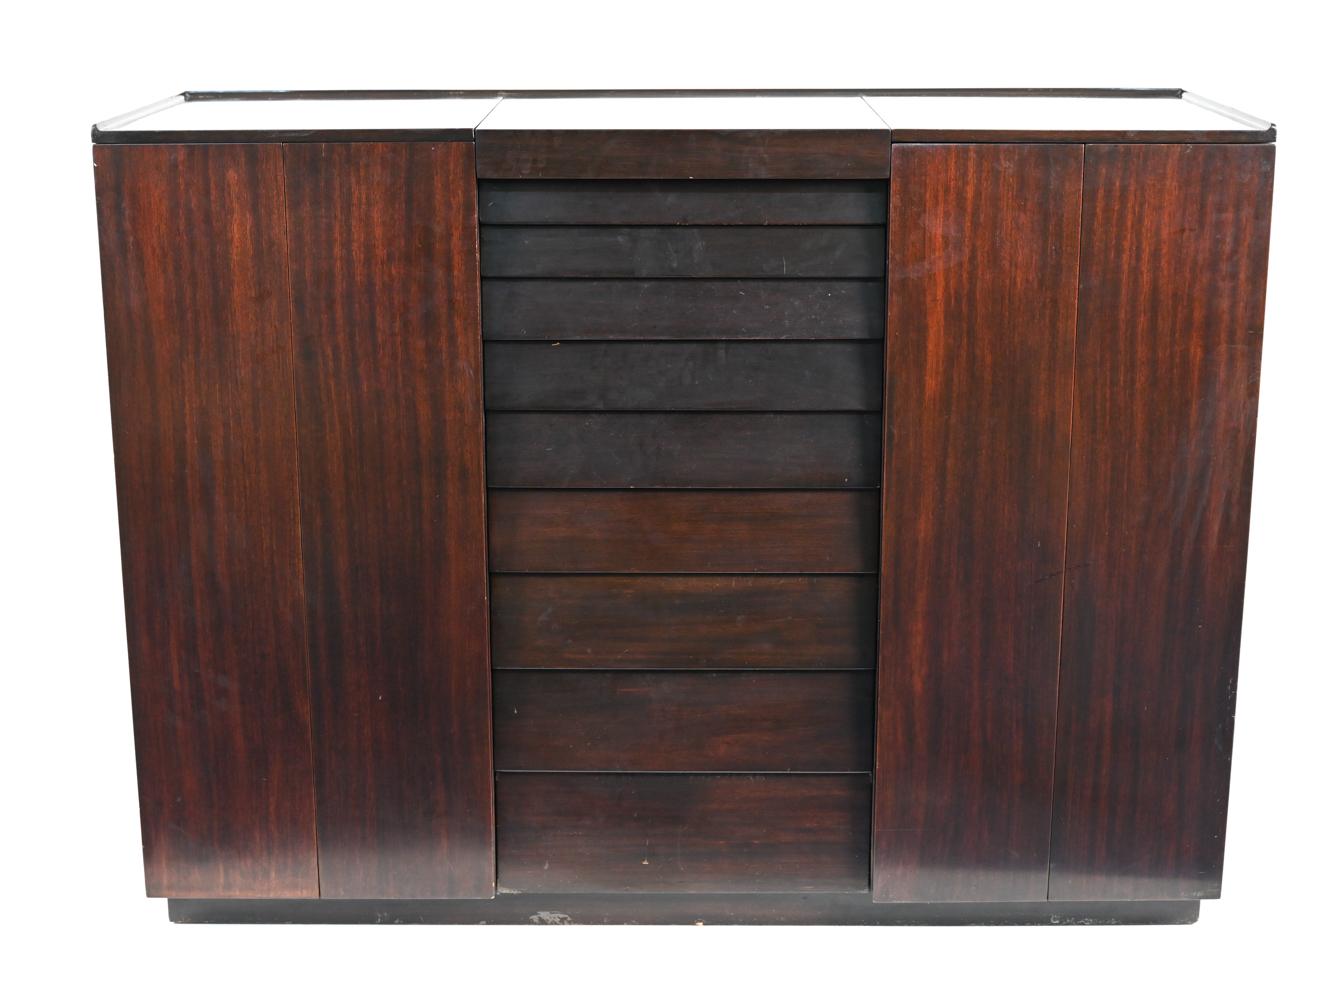 A beautiful functional wardrobe cabinet designed by Edward Wormley for Dunbar, c. mid-1950's. This piece in ebonized mahogany features bi-fold cabinet doors, that open to reveal a fitted interior, flanking central dovetailed drawers and a fabulous